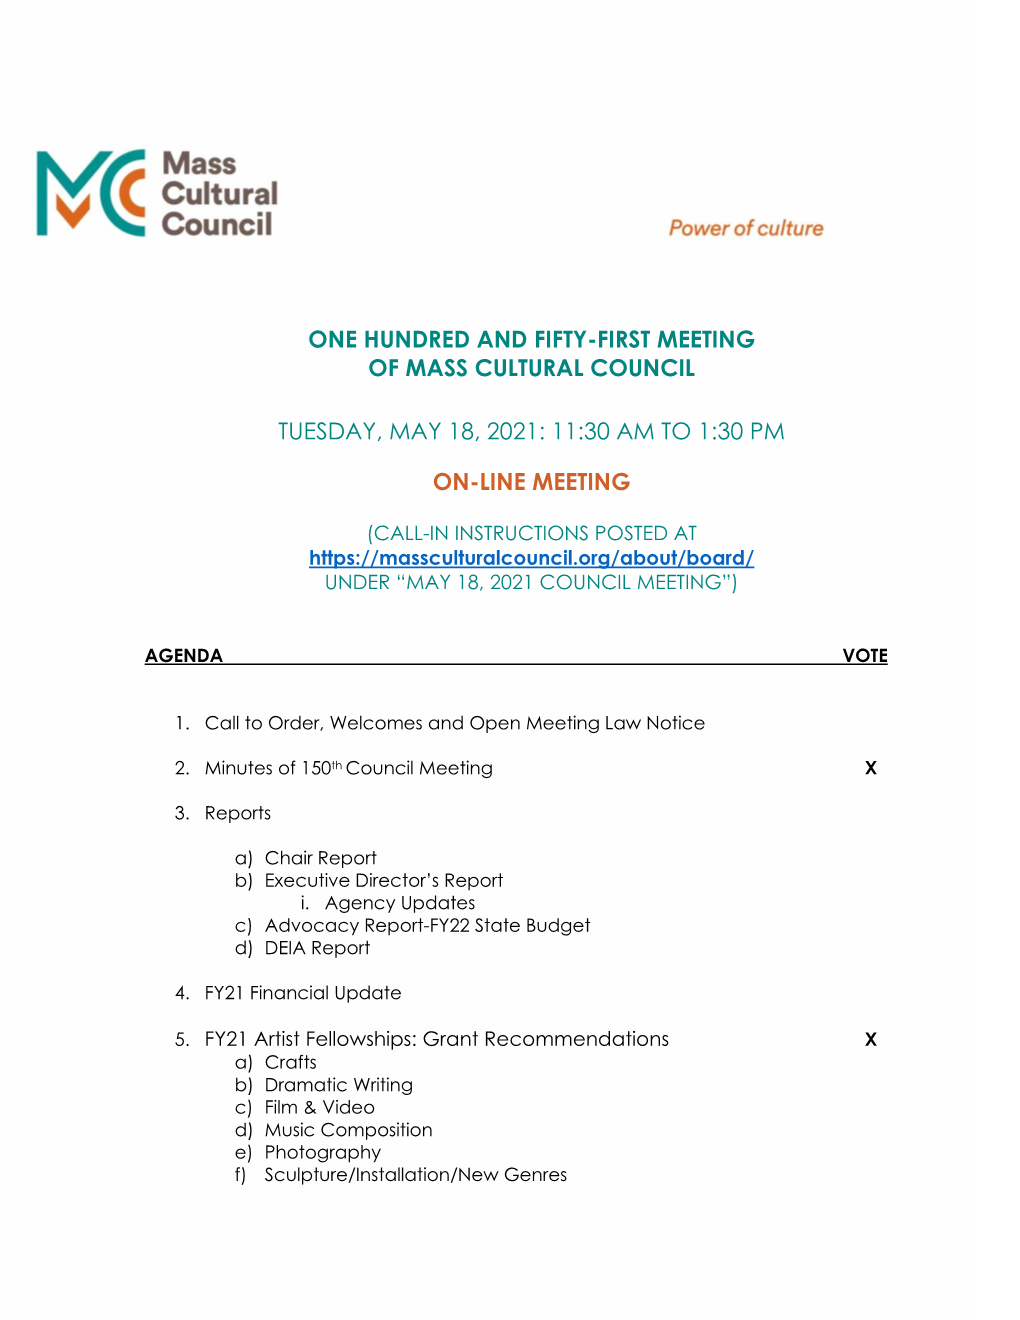 One Hundred and Fifty-First Meeting of Mass Cultural Council Tuesday, May